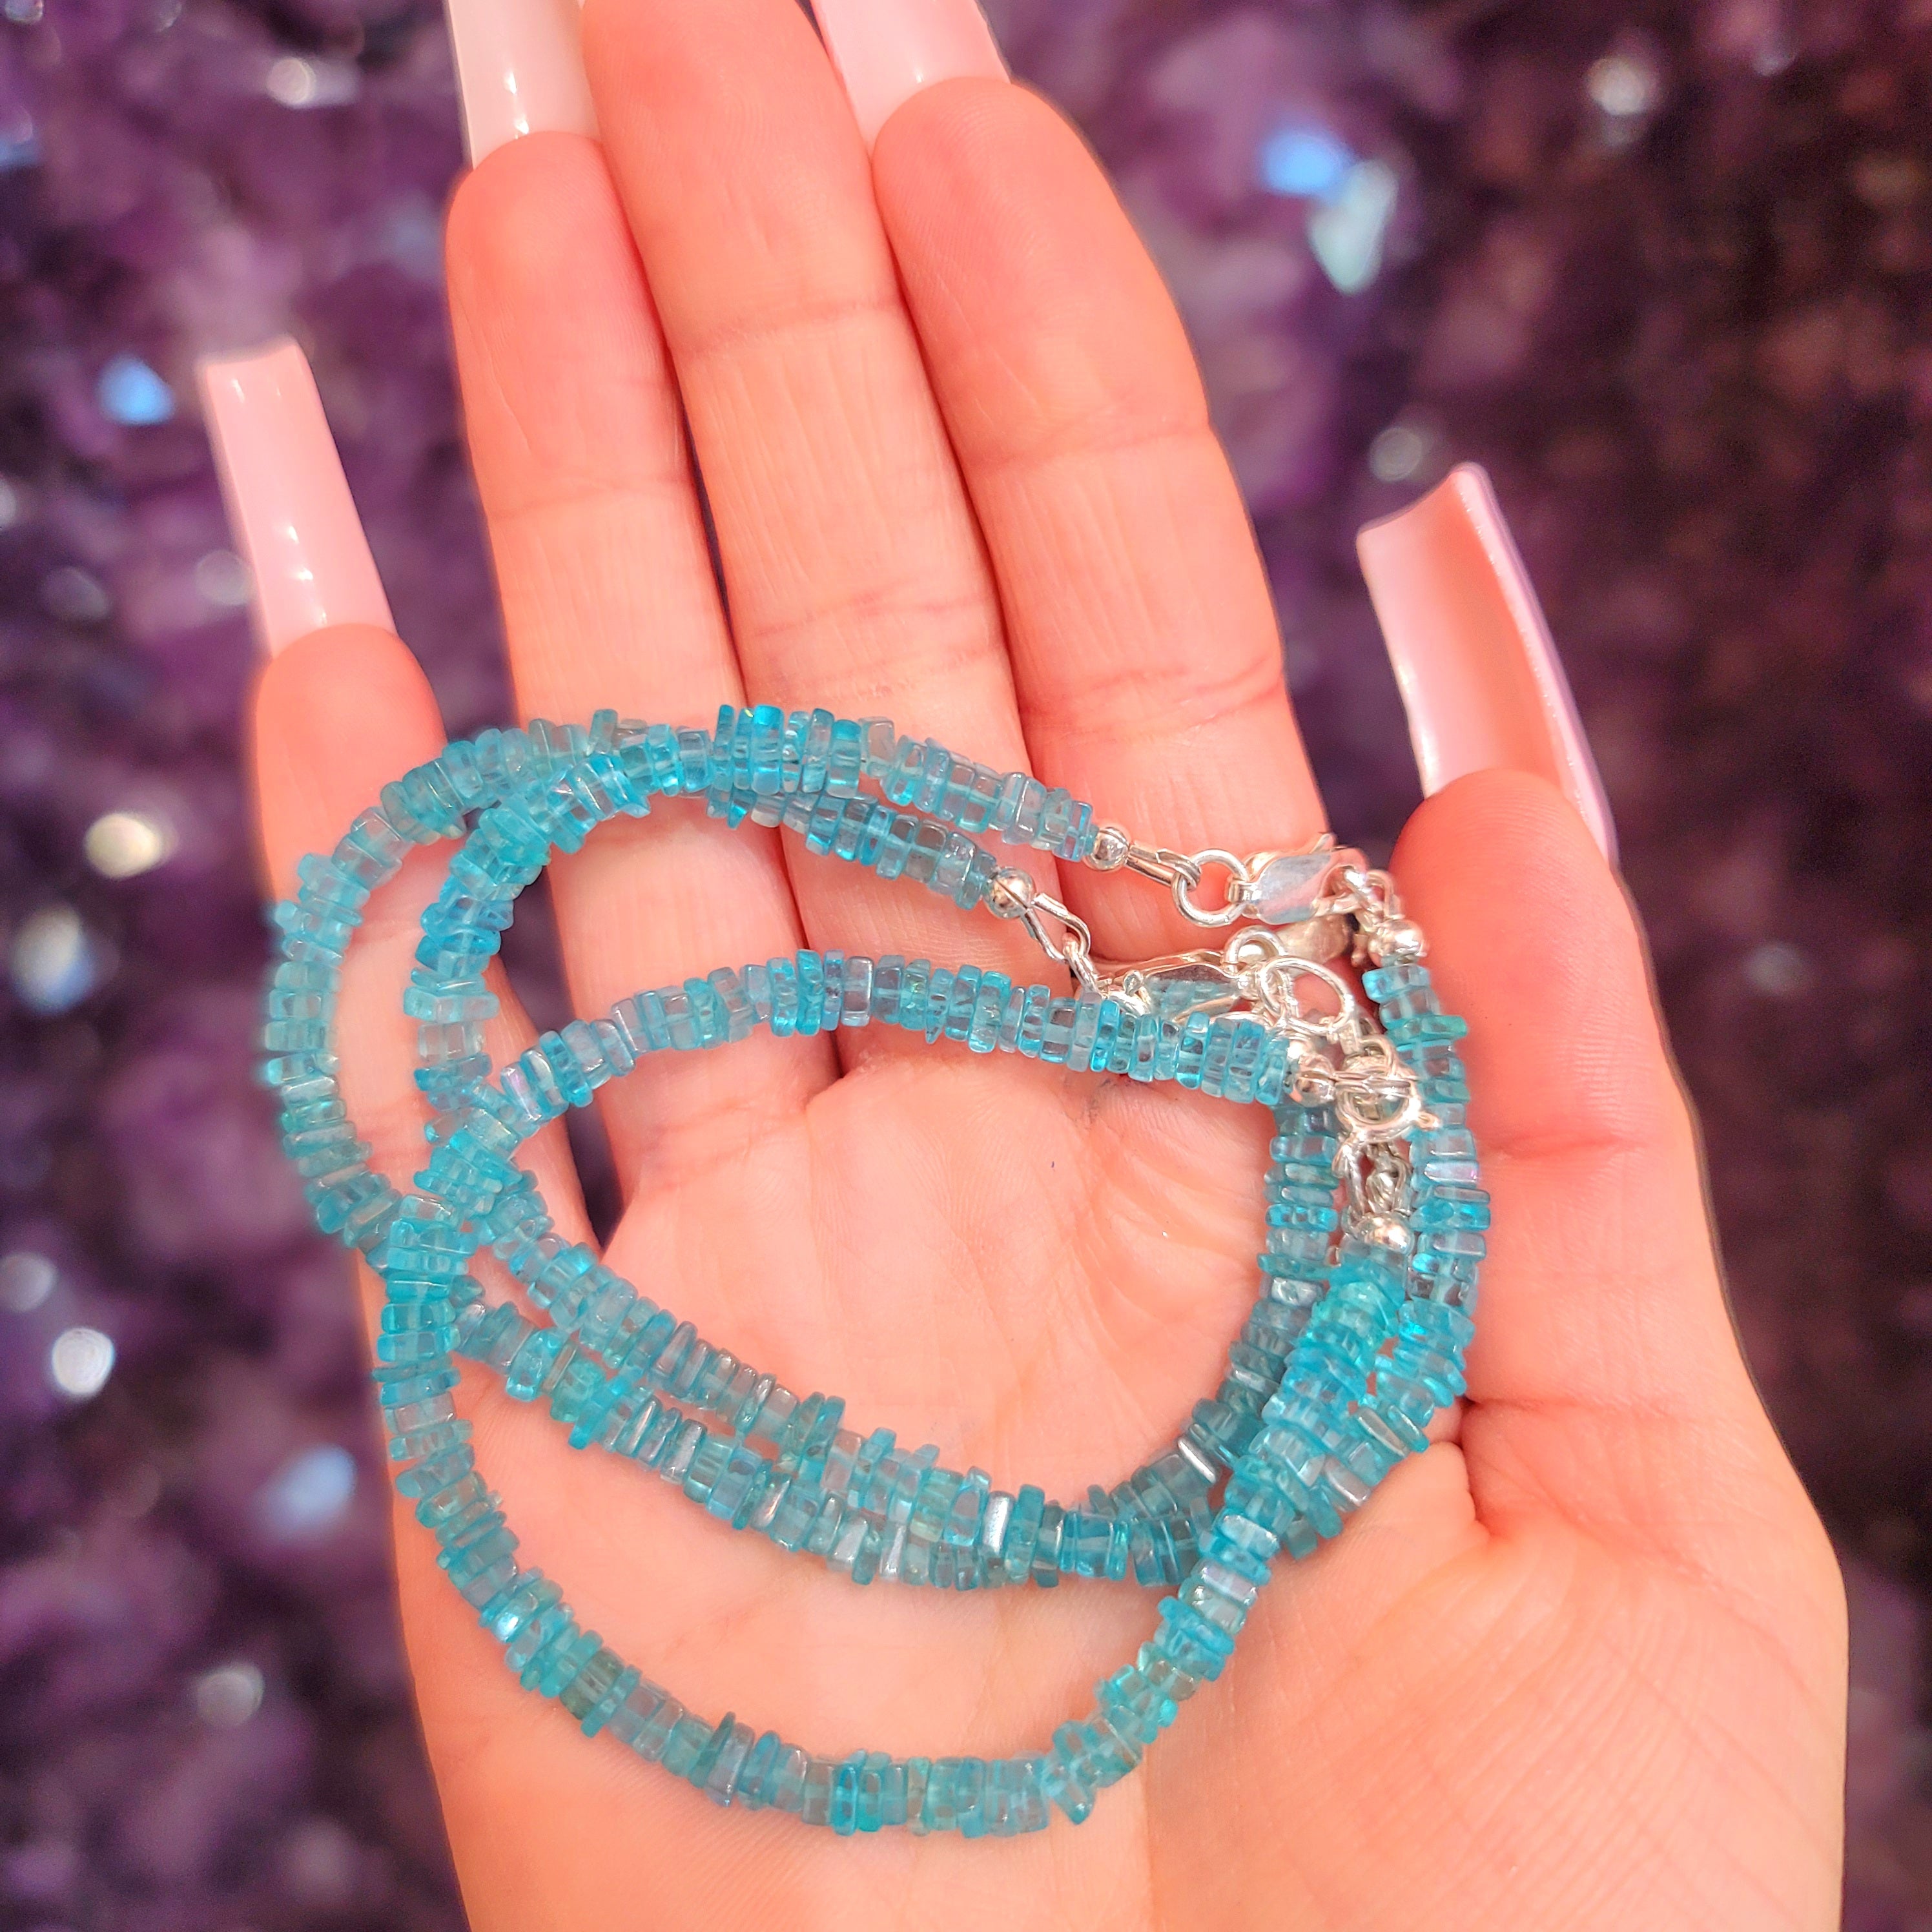 Pariaba Blue Apatite Square Bracelet for Confidence, Intuition and Power